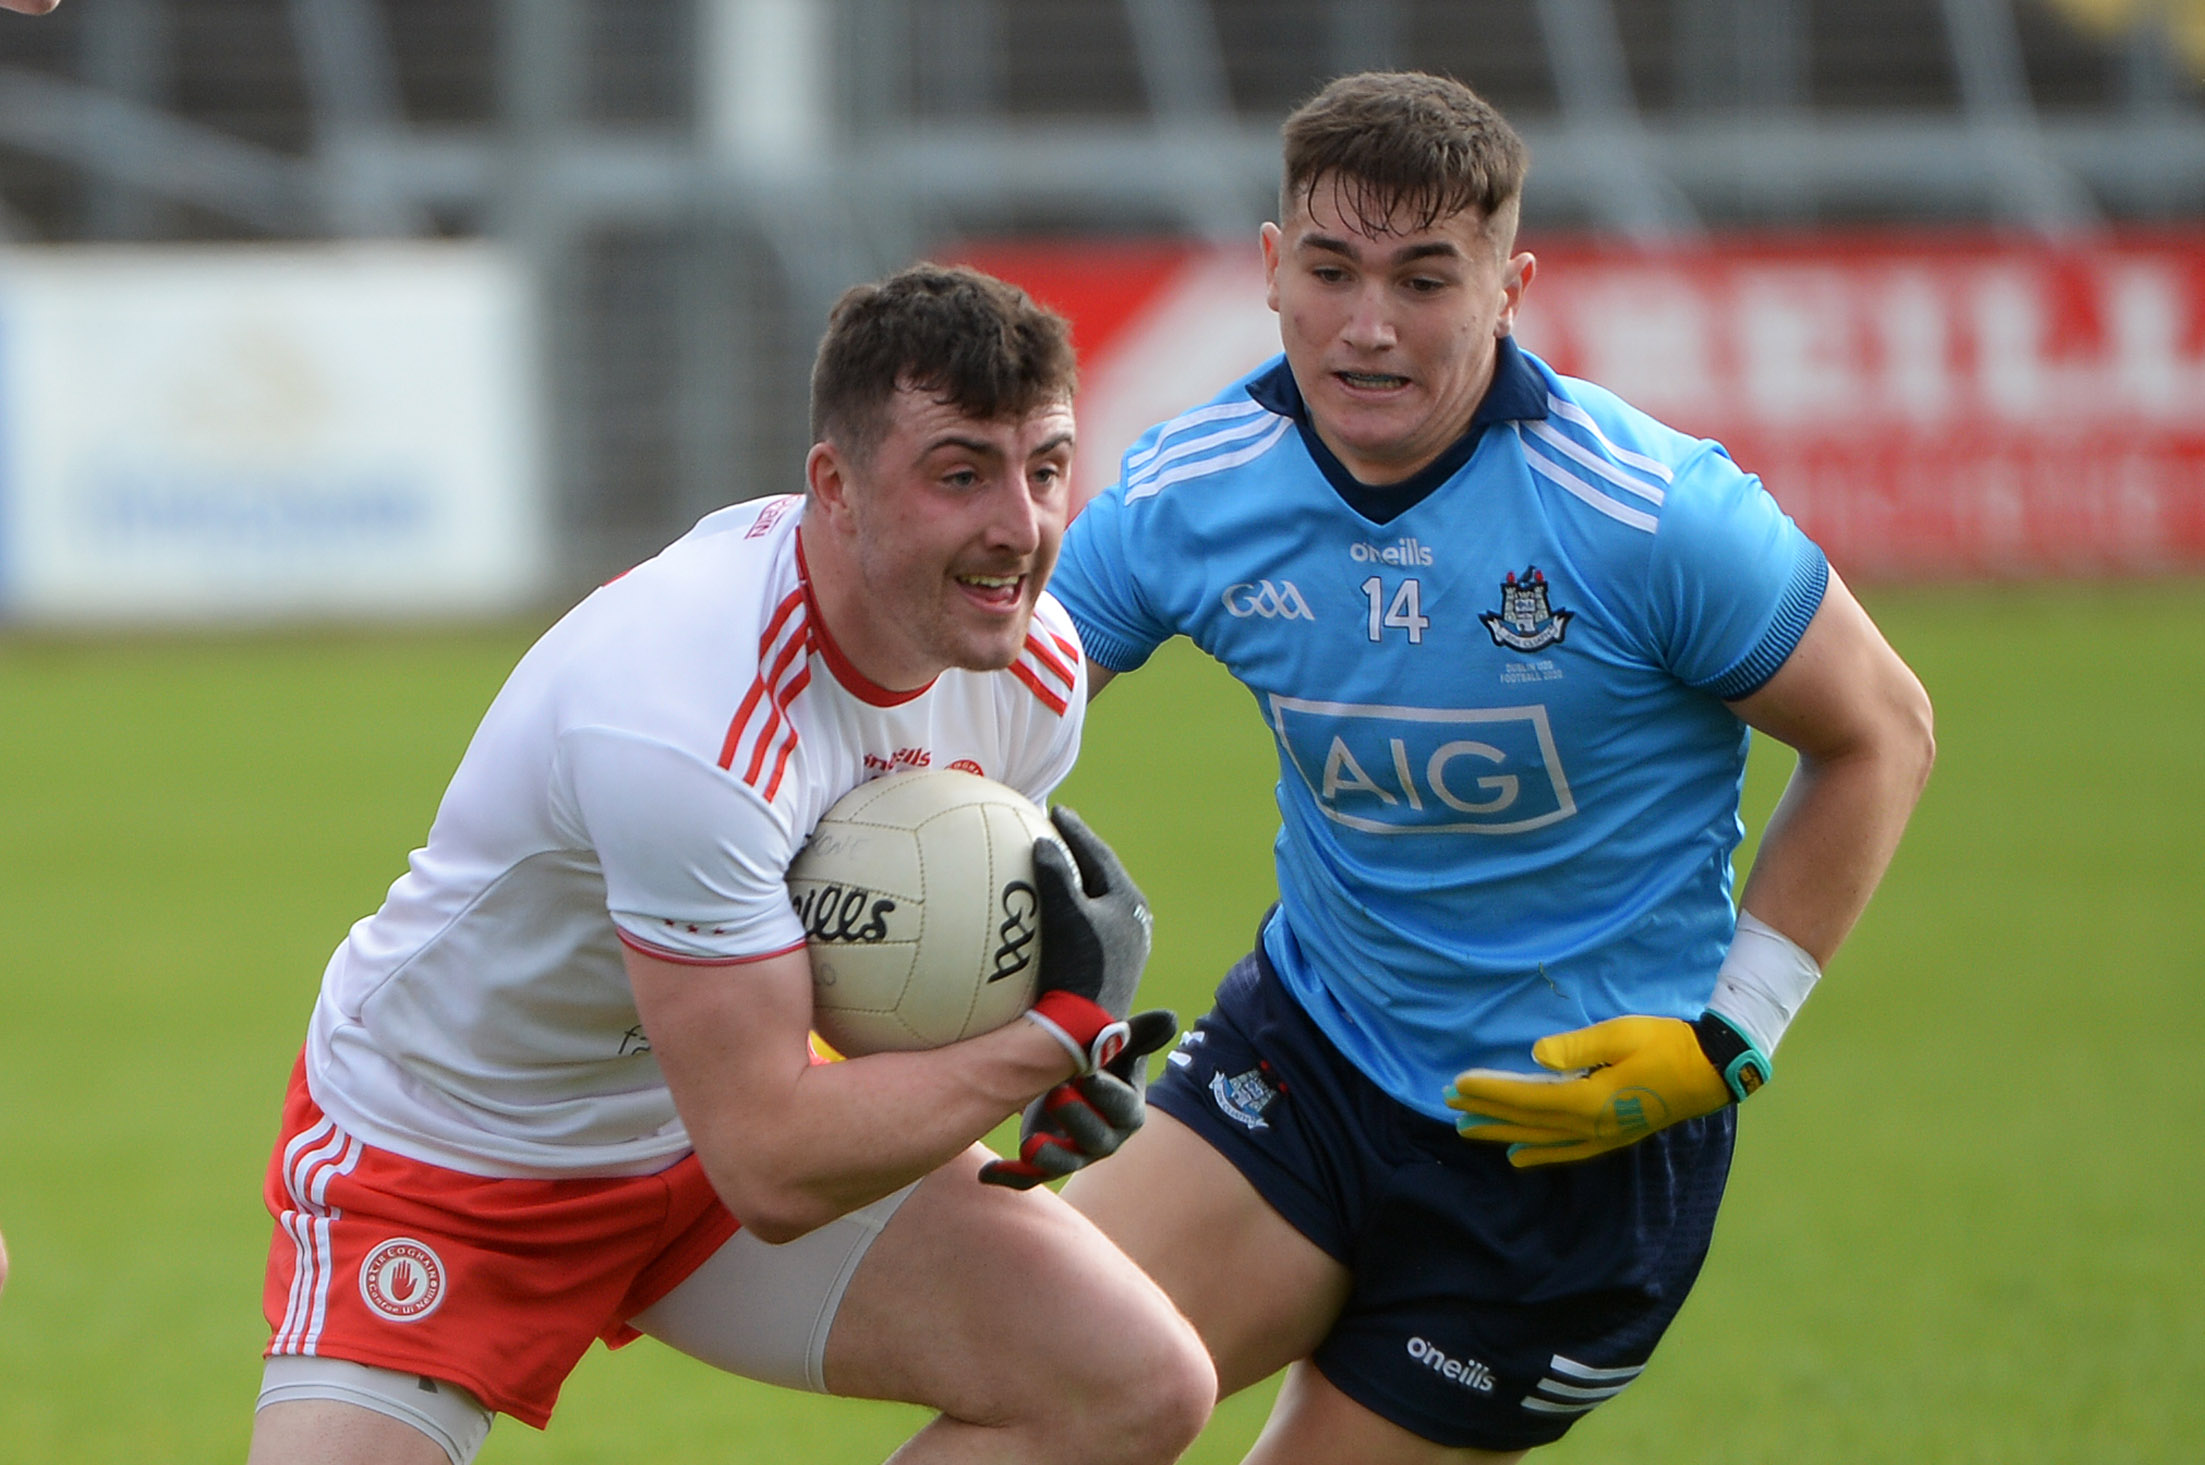 Cormac Munroe and Benny Gallen leave Tyrone panel